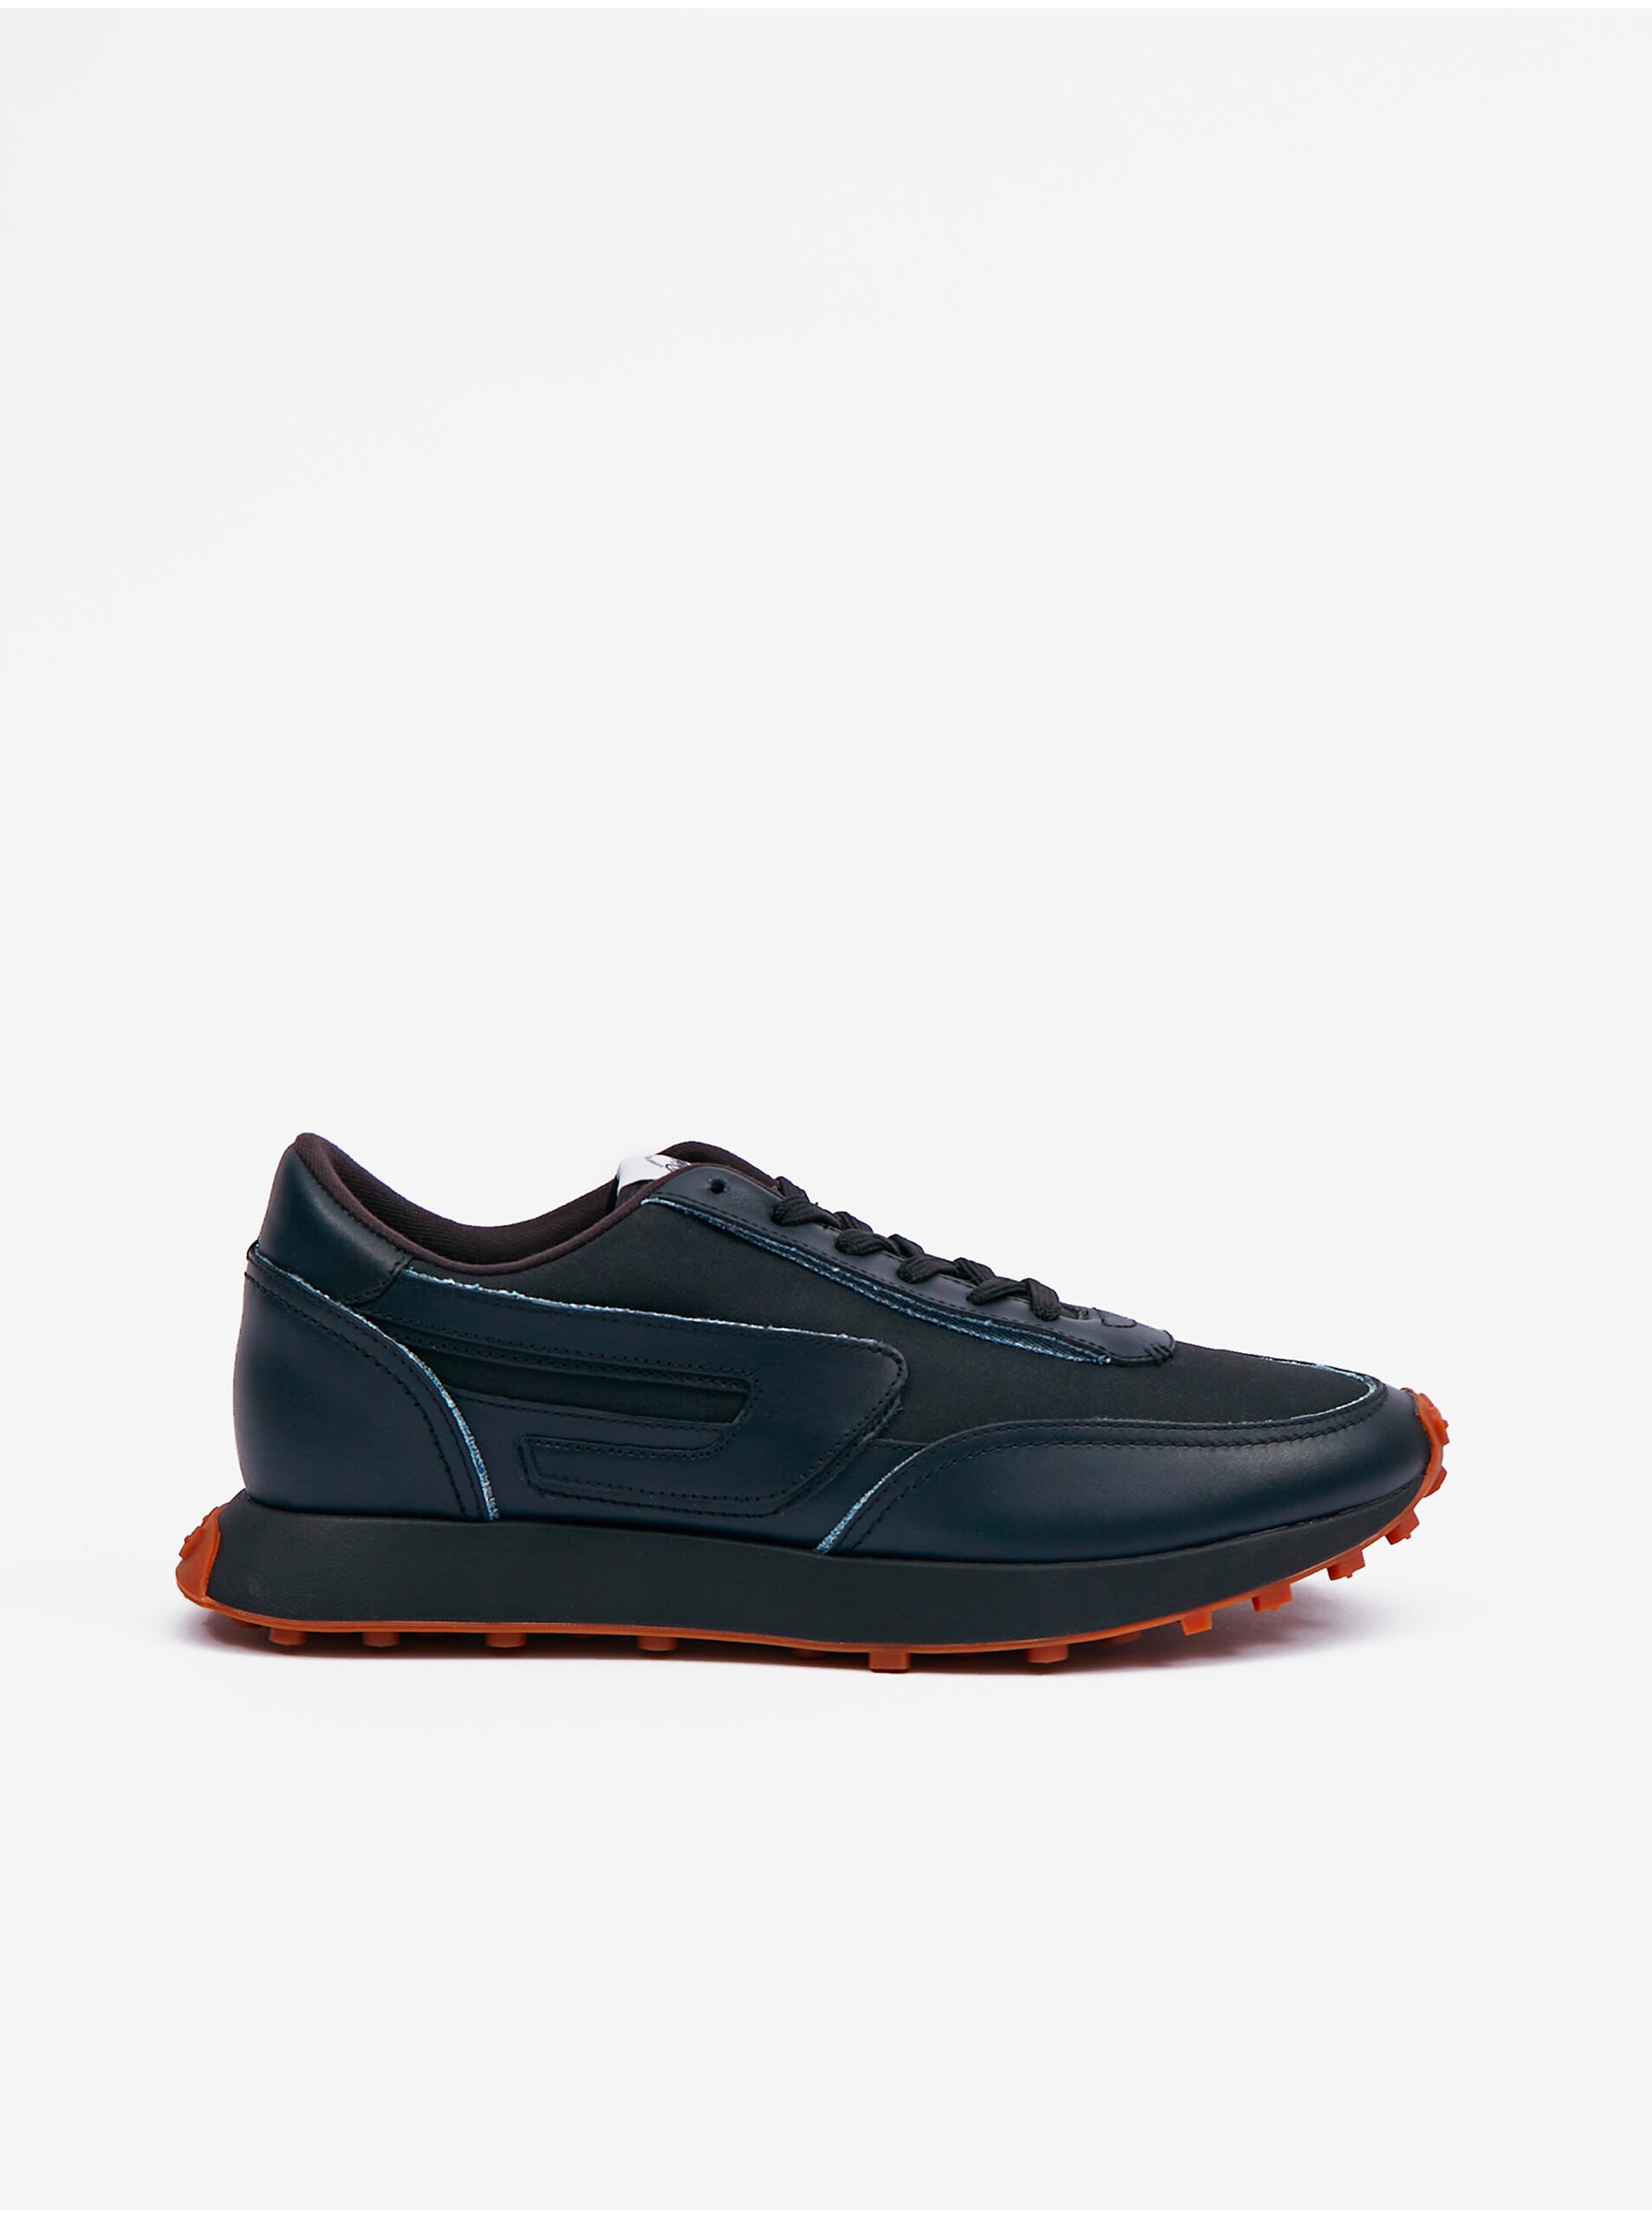 Men's Blue and Black Sneakers with Leather Detail Diesel Racer - Men's